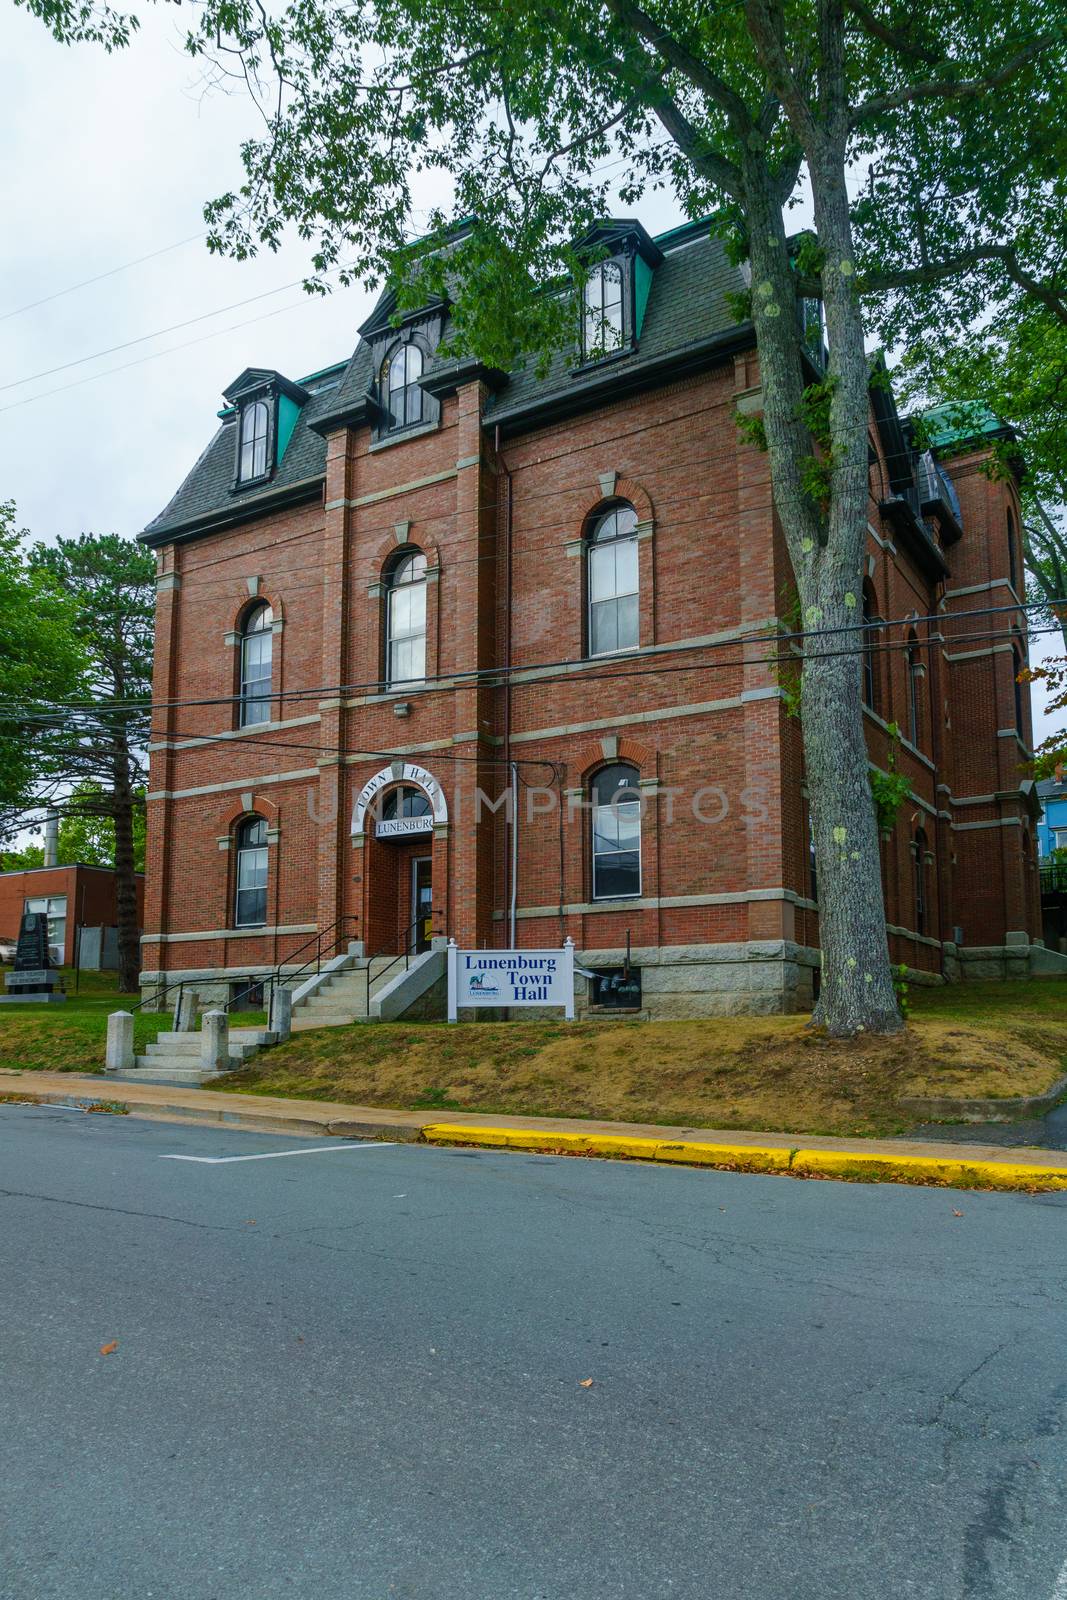 Town hall building in Lunenburg by RnDmS